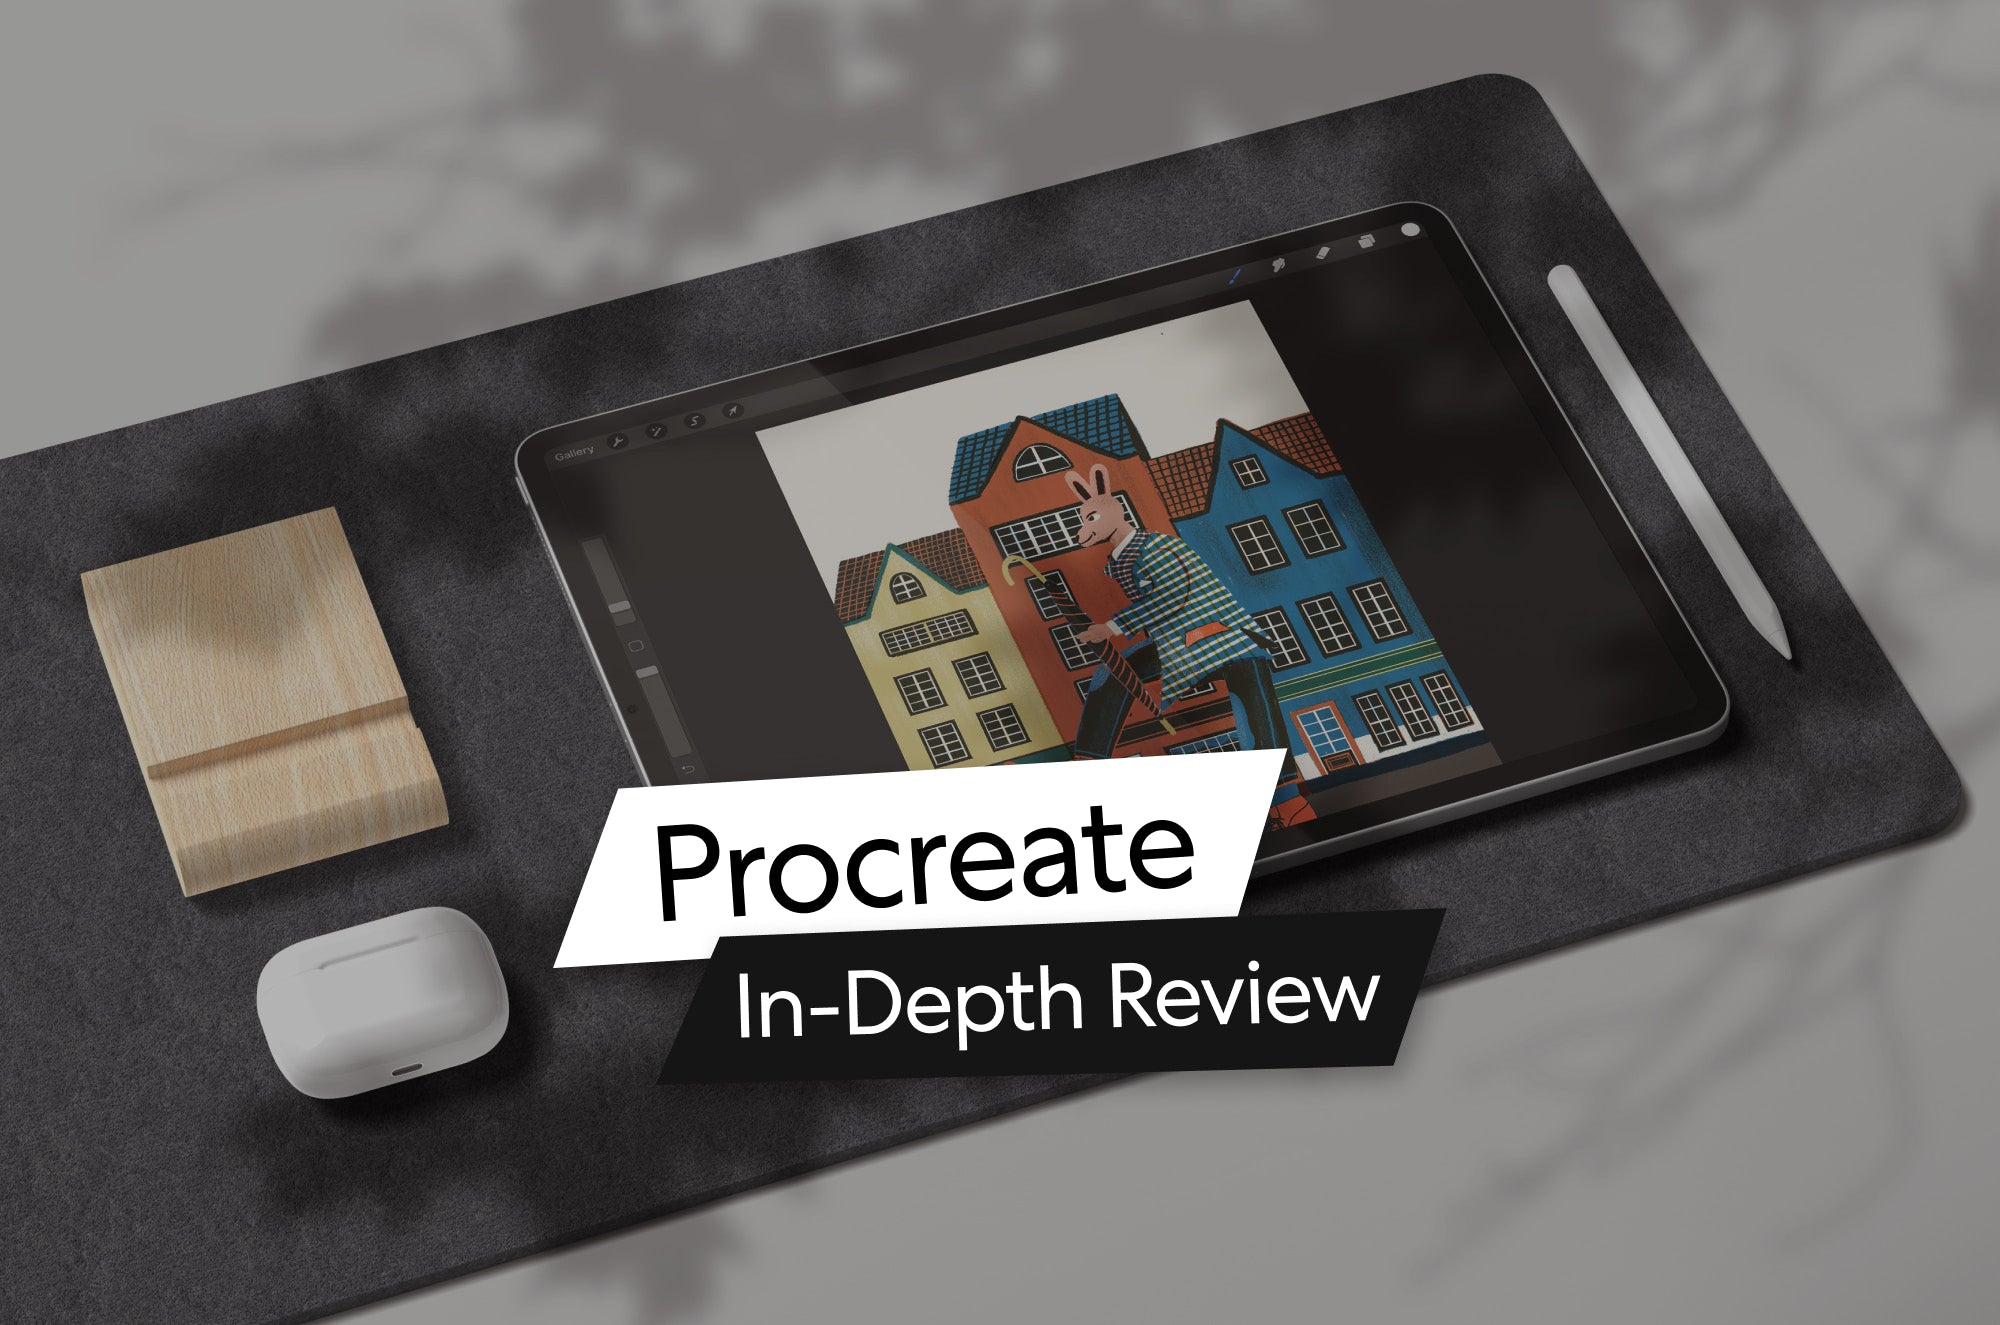 Procreate: In-Depth Review